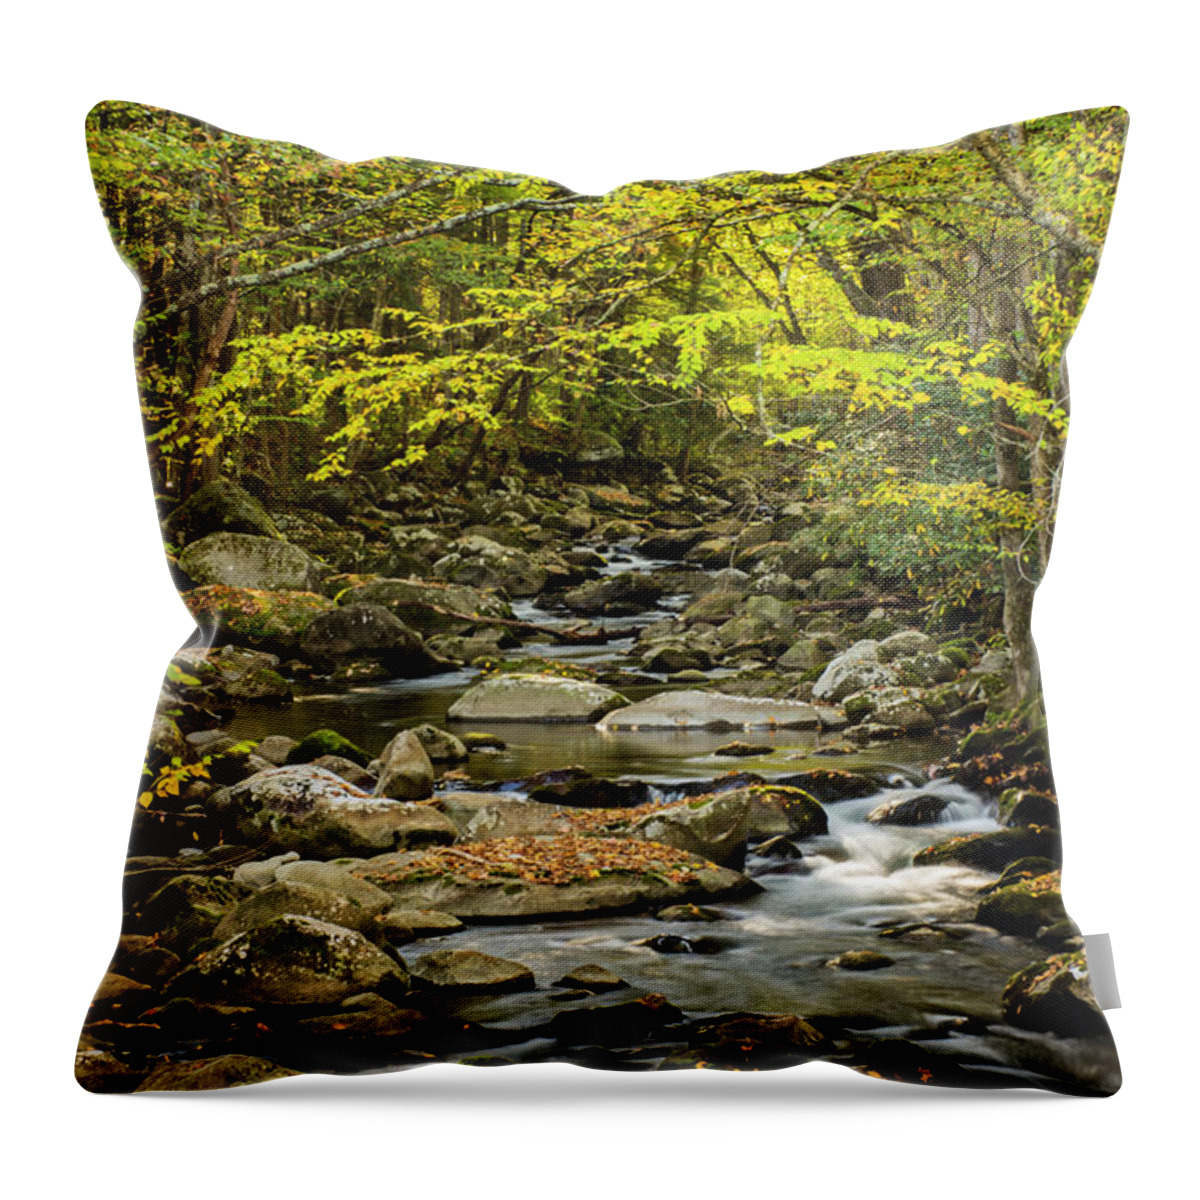 Greenbrier In Great Smoky National Park Throw Pillow featuring the photograph Greenbrier by Peg Runyan